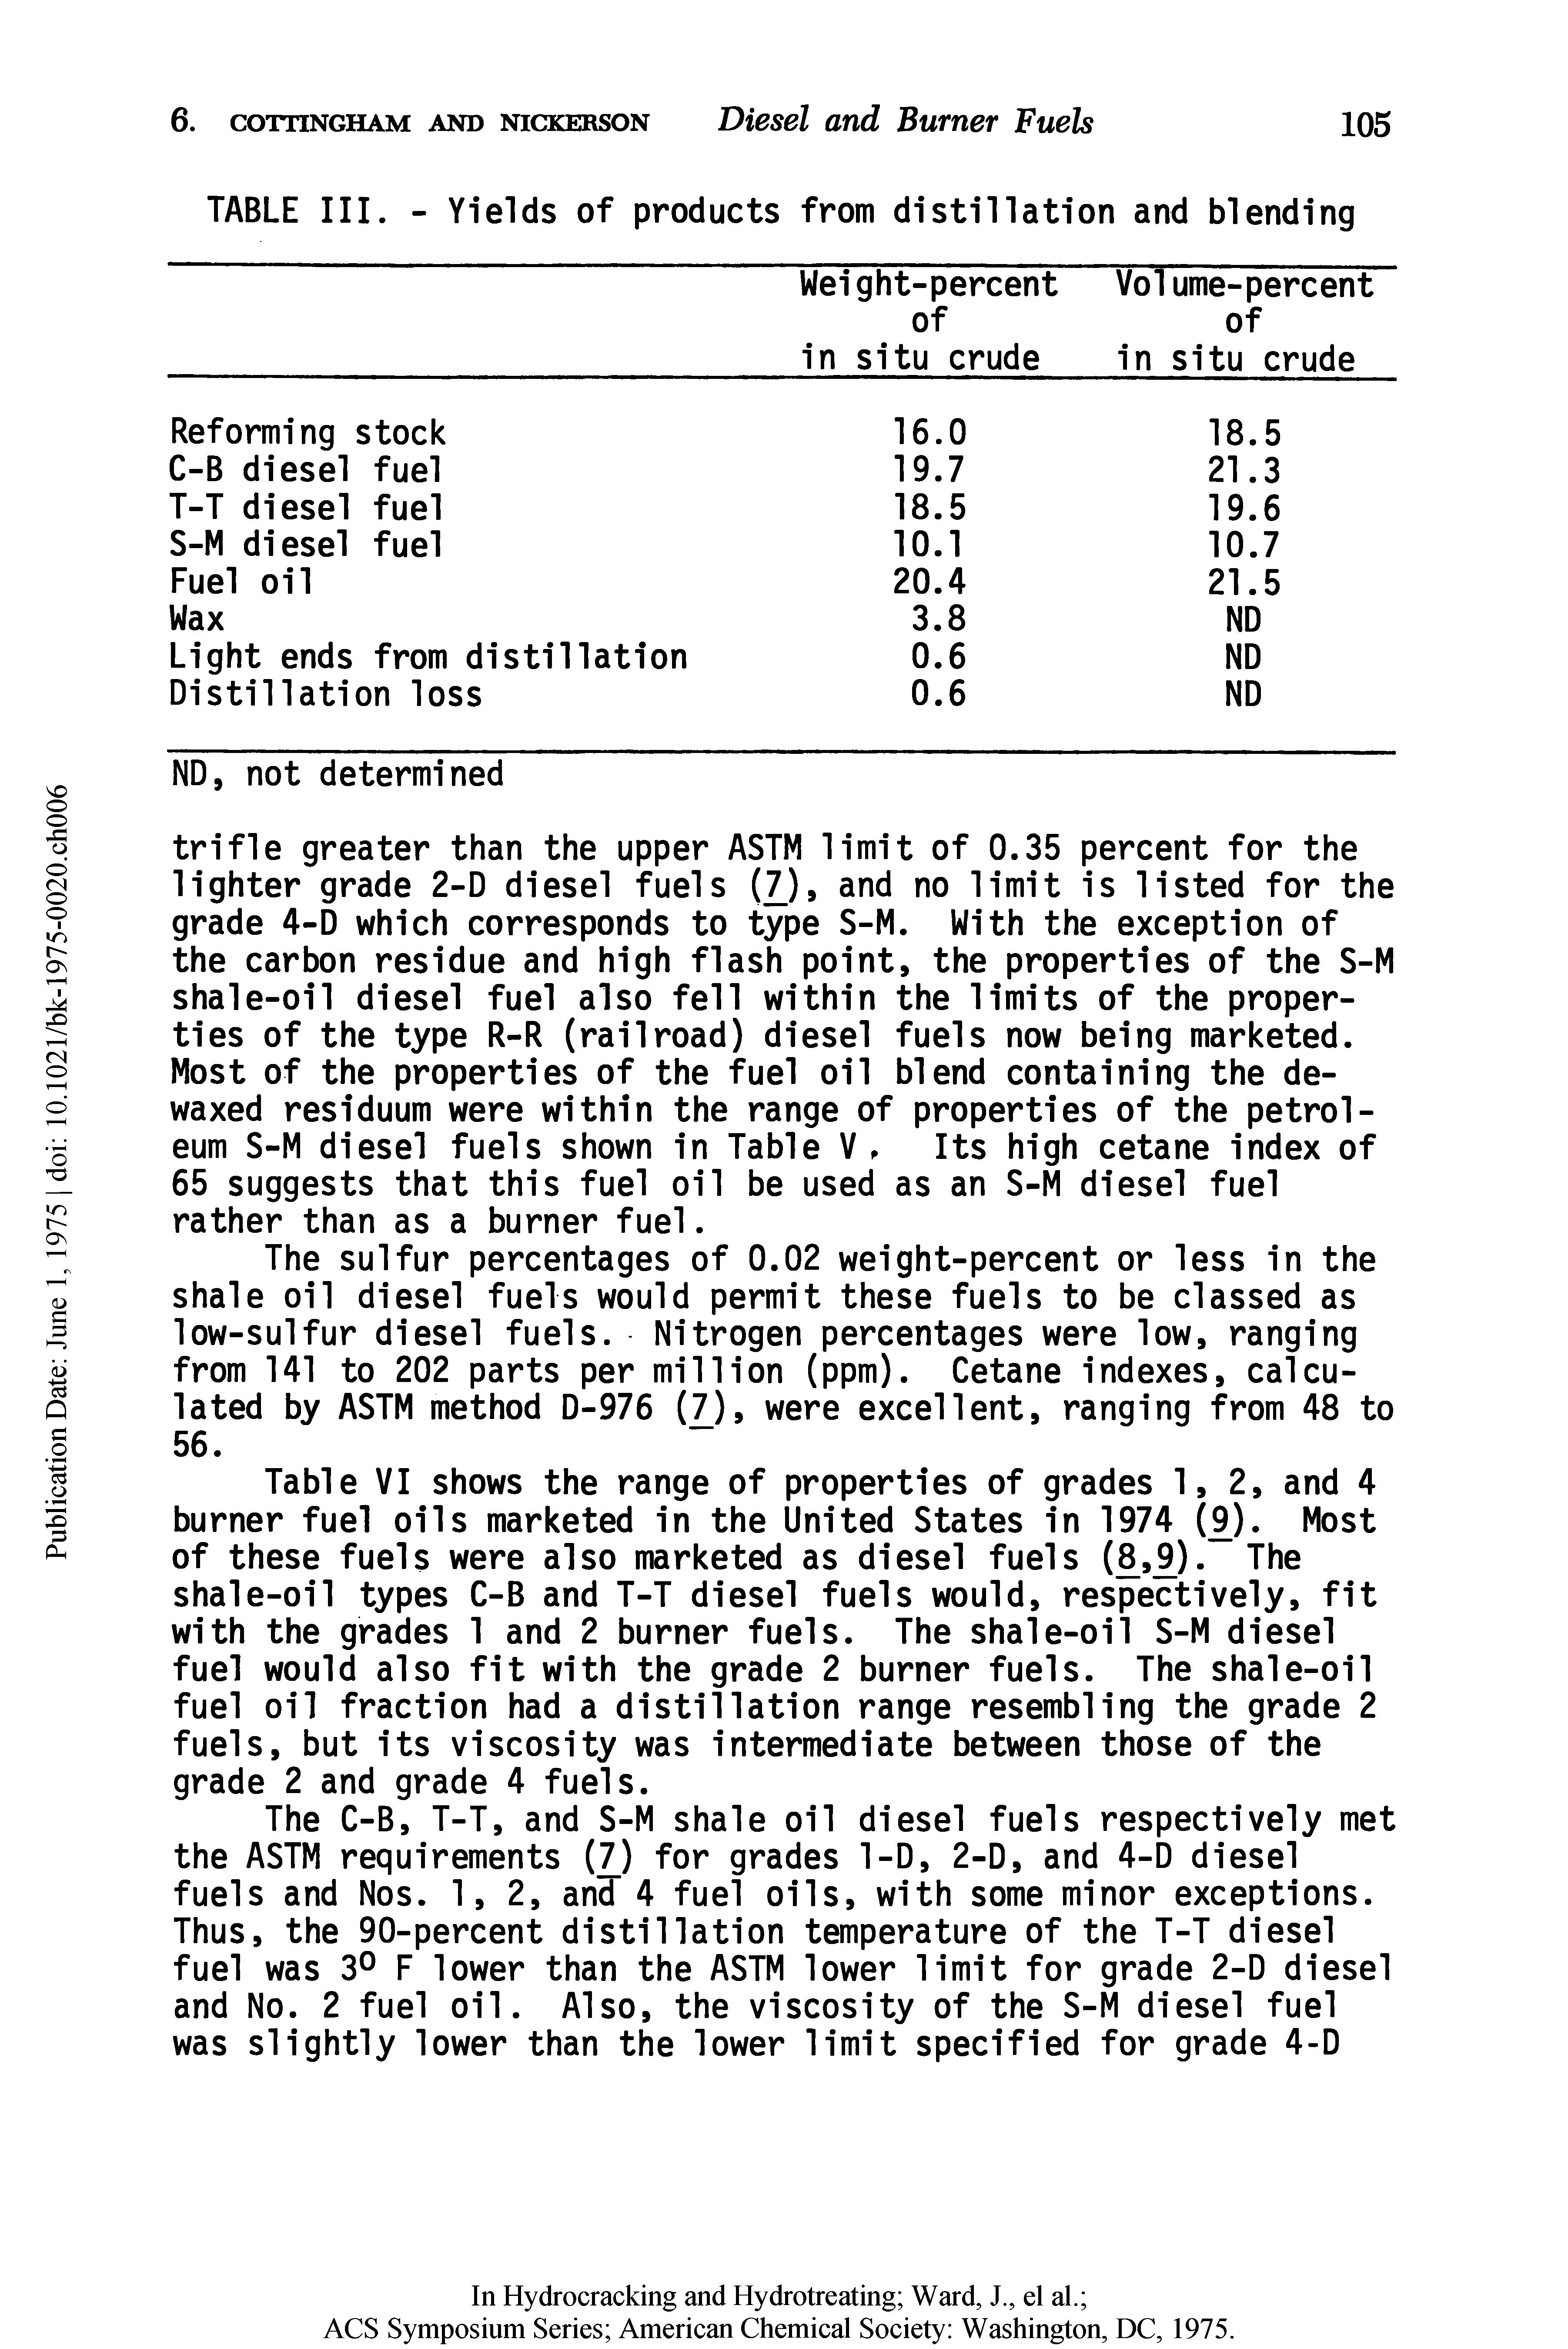 Table VI shows the range of properties of grades 1, 2, and 4 burner fuel oils marketed in the United States in 1974 (9). Most of these fuels were also marketed as diesel fuels (JJ,9). The shale-oil types C-B and T-T diesel fuels would, respectively, fit with the grades 1 and 2 burner fuels. The shale-oil S-M diesel fuel would also fit with the grade 2 burner fuels. The shale-oil fuel oil fraction had a distillation range resembling the grade 2 fuels, but its viscosity was intermediate between those of the grade 2 and grade 4 fuels.